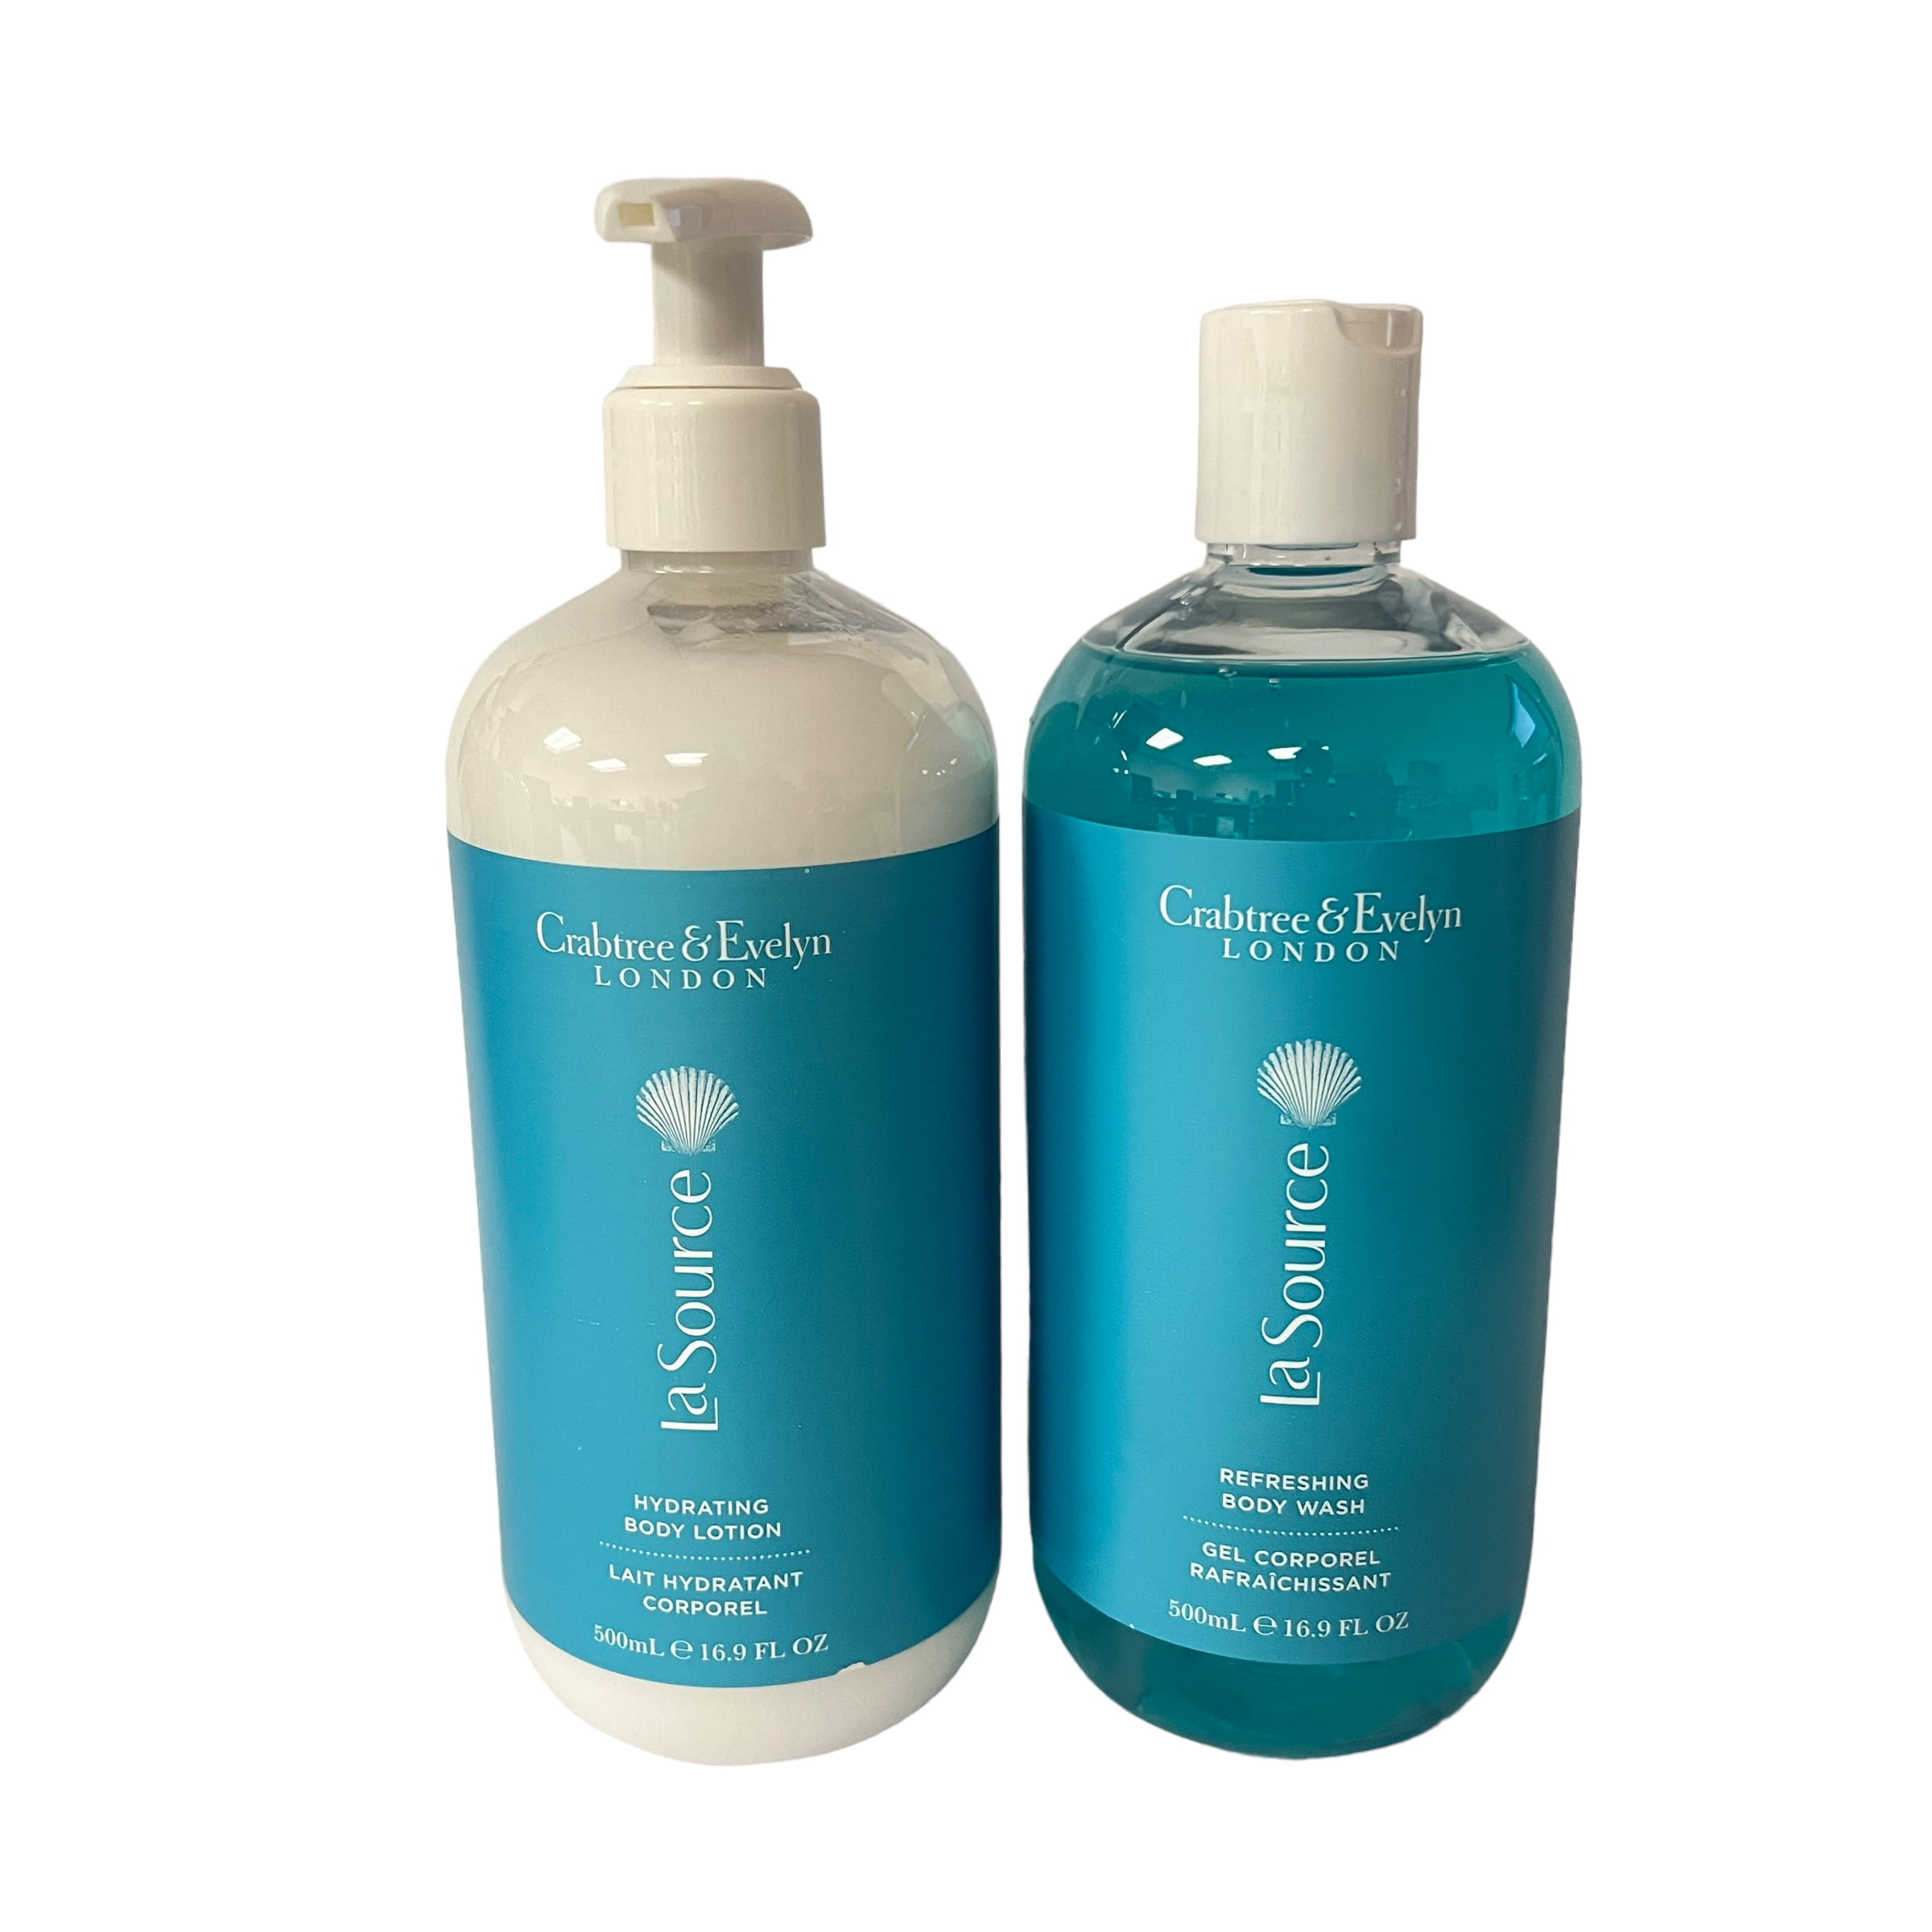 Ultimate Skin Elixir: Luxurious Hydration Body Lotion with Aloe